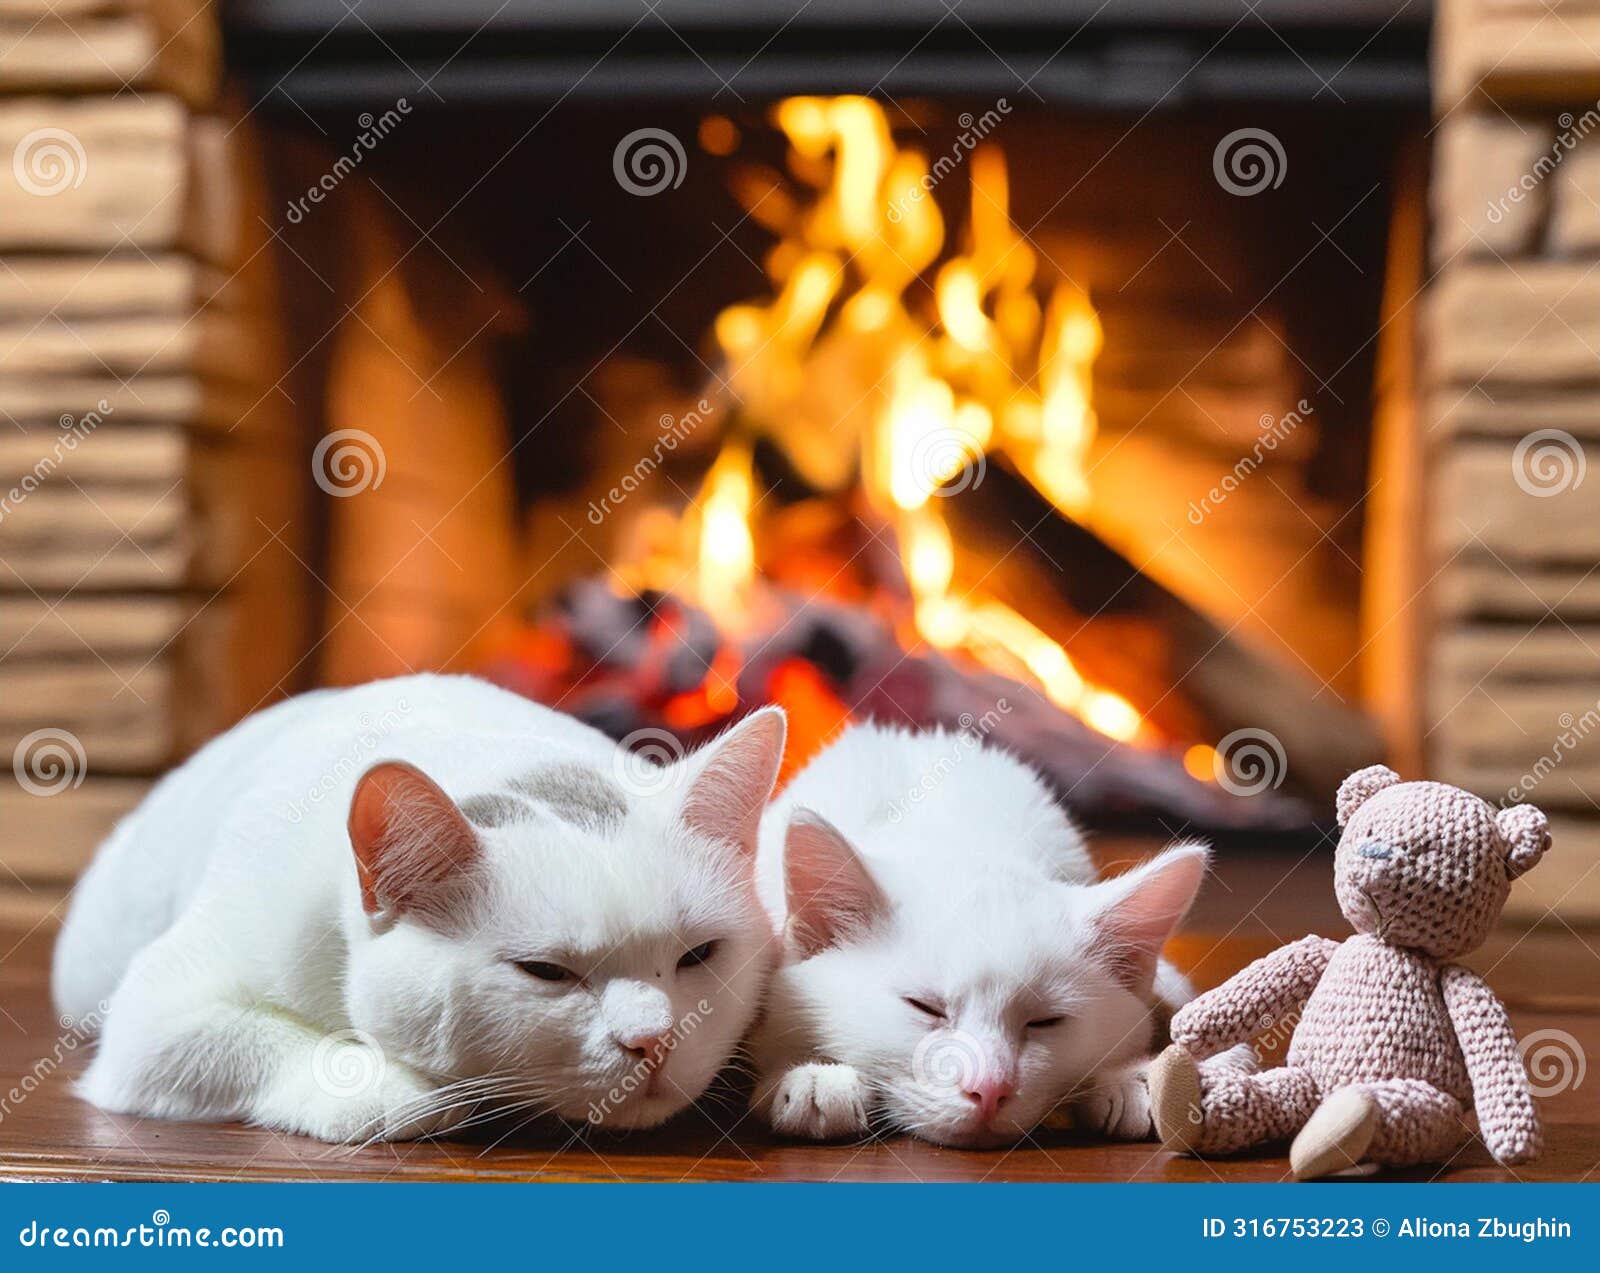 two white cats sleeping comfortably in front of the fireplace